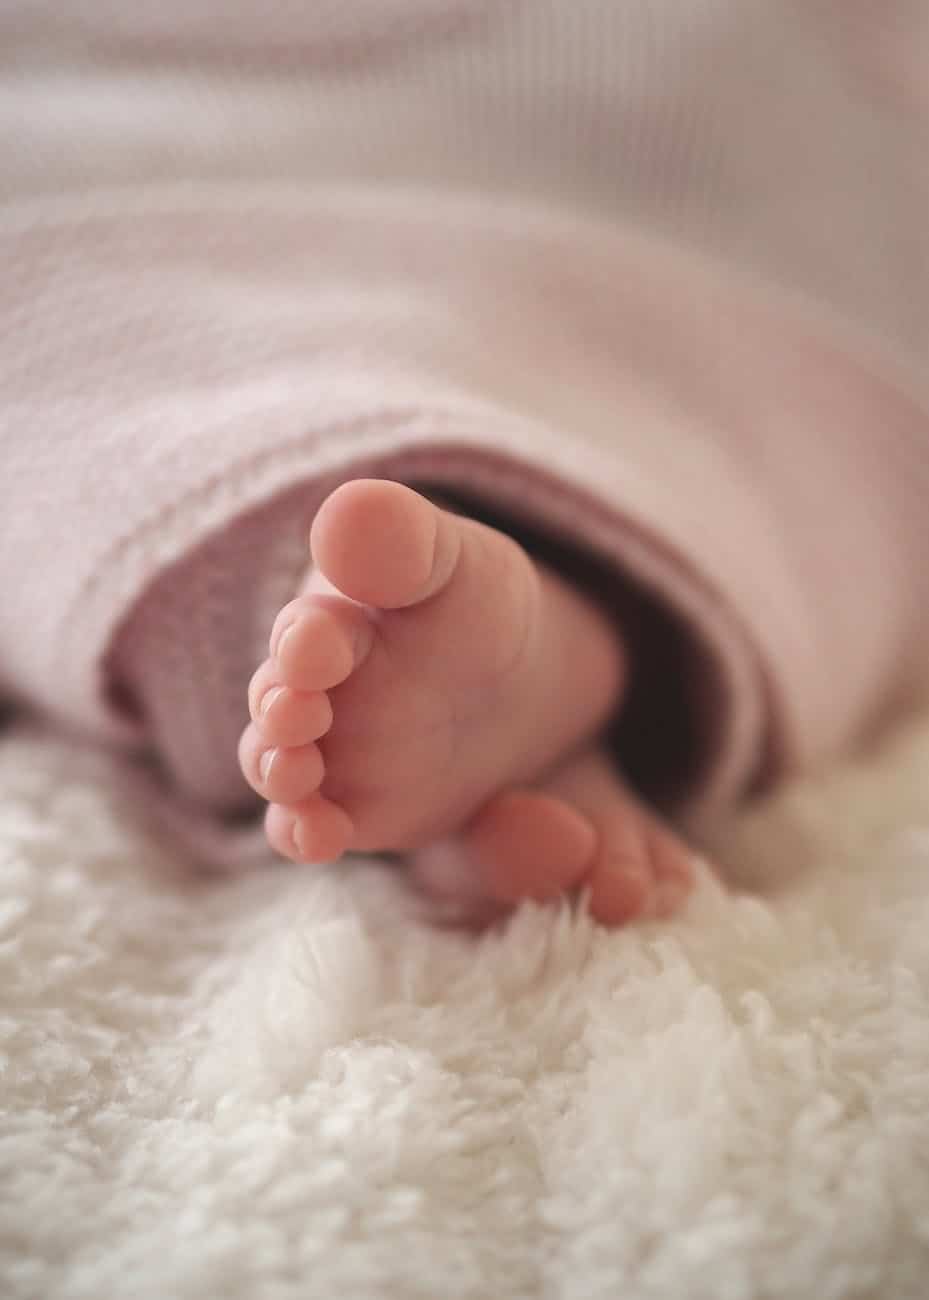 close up of baby feet